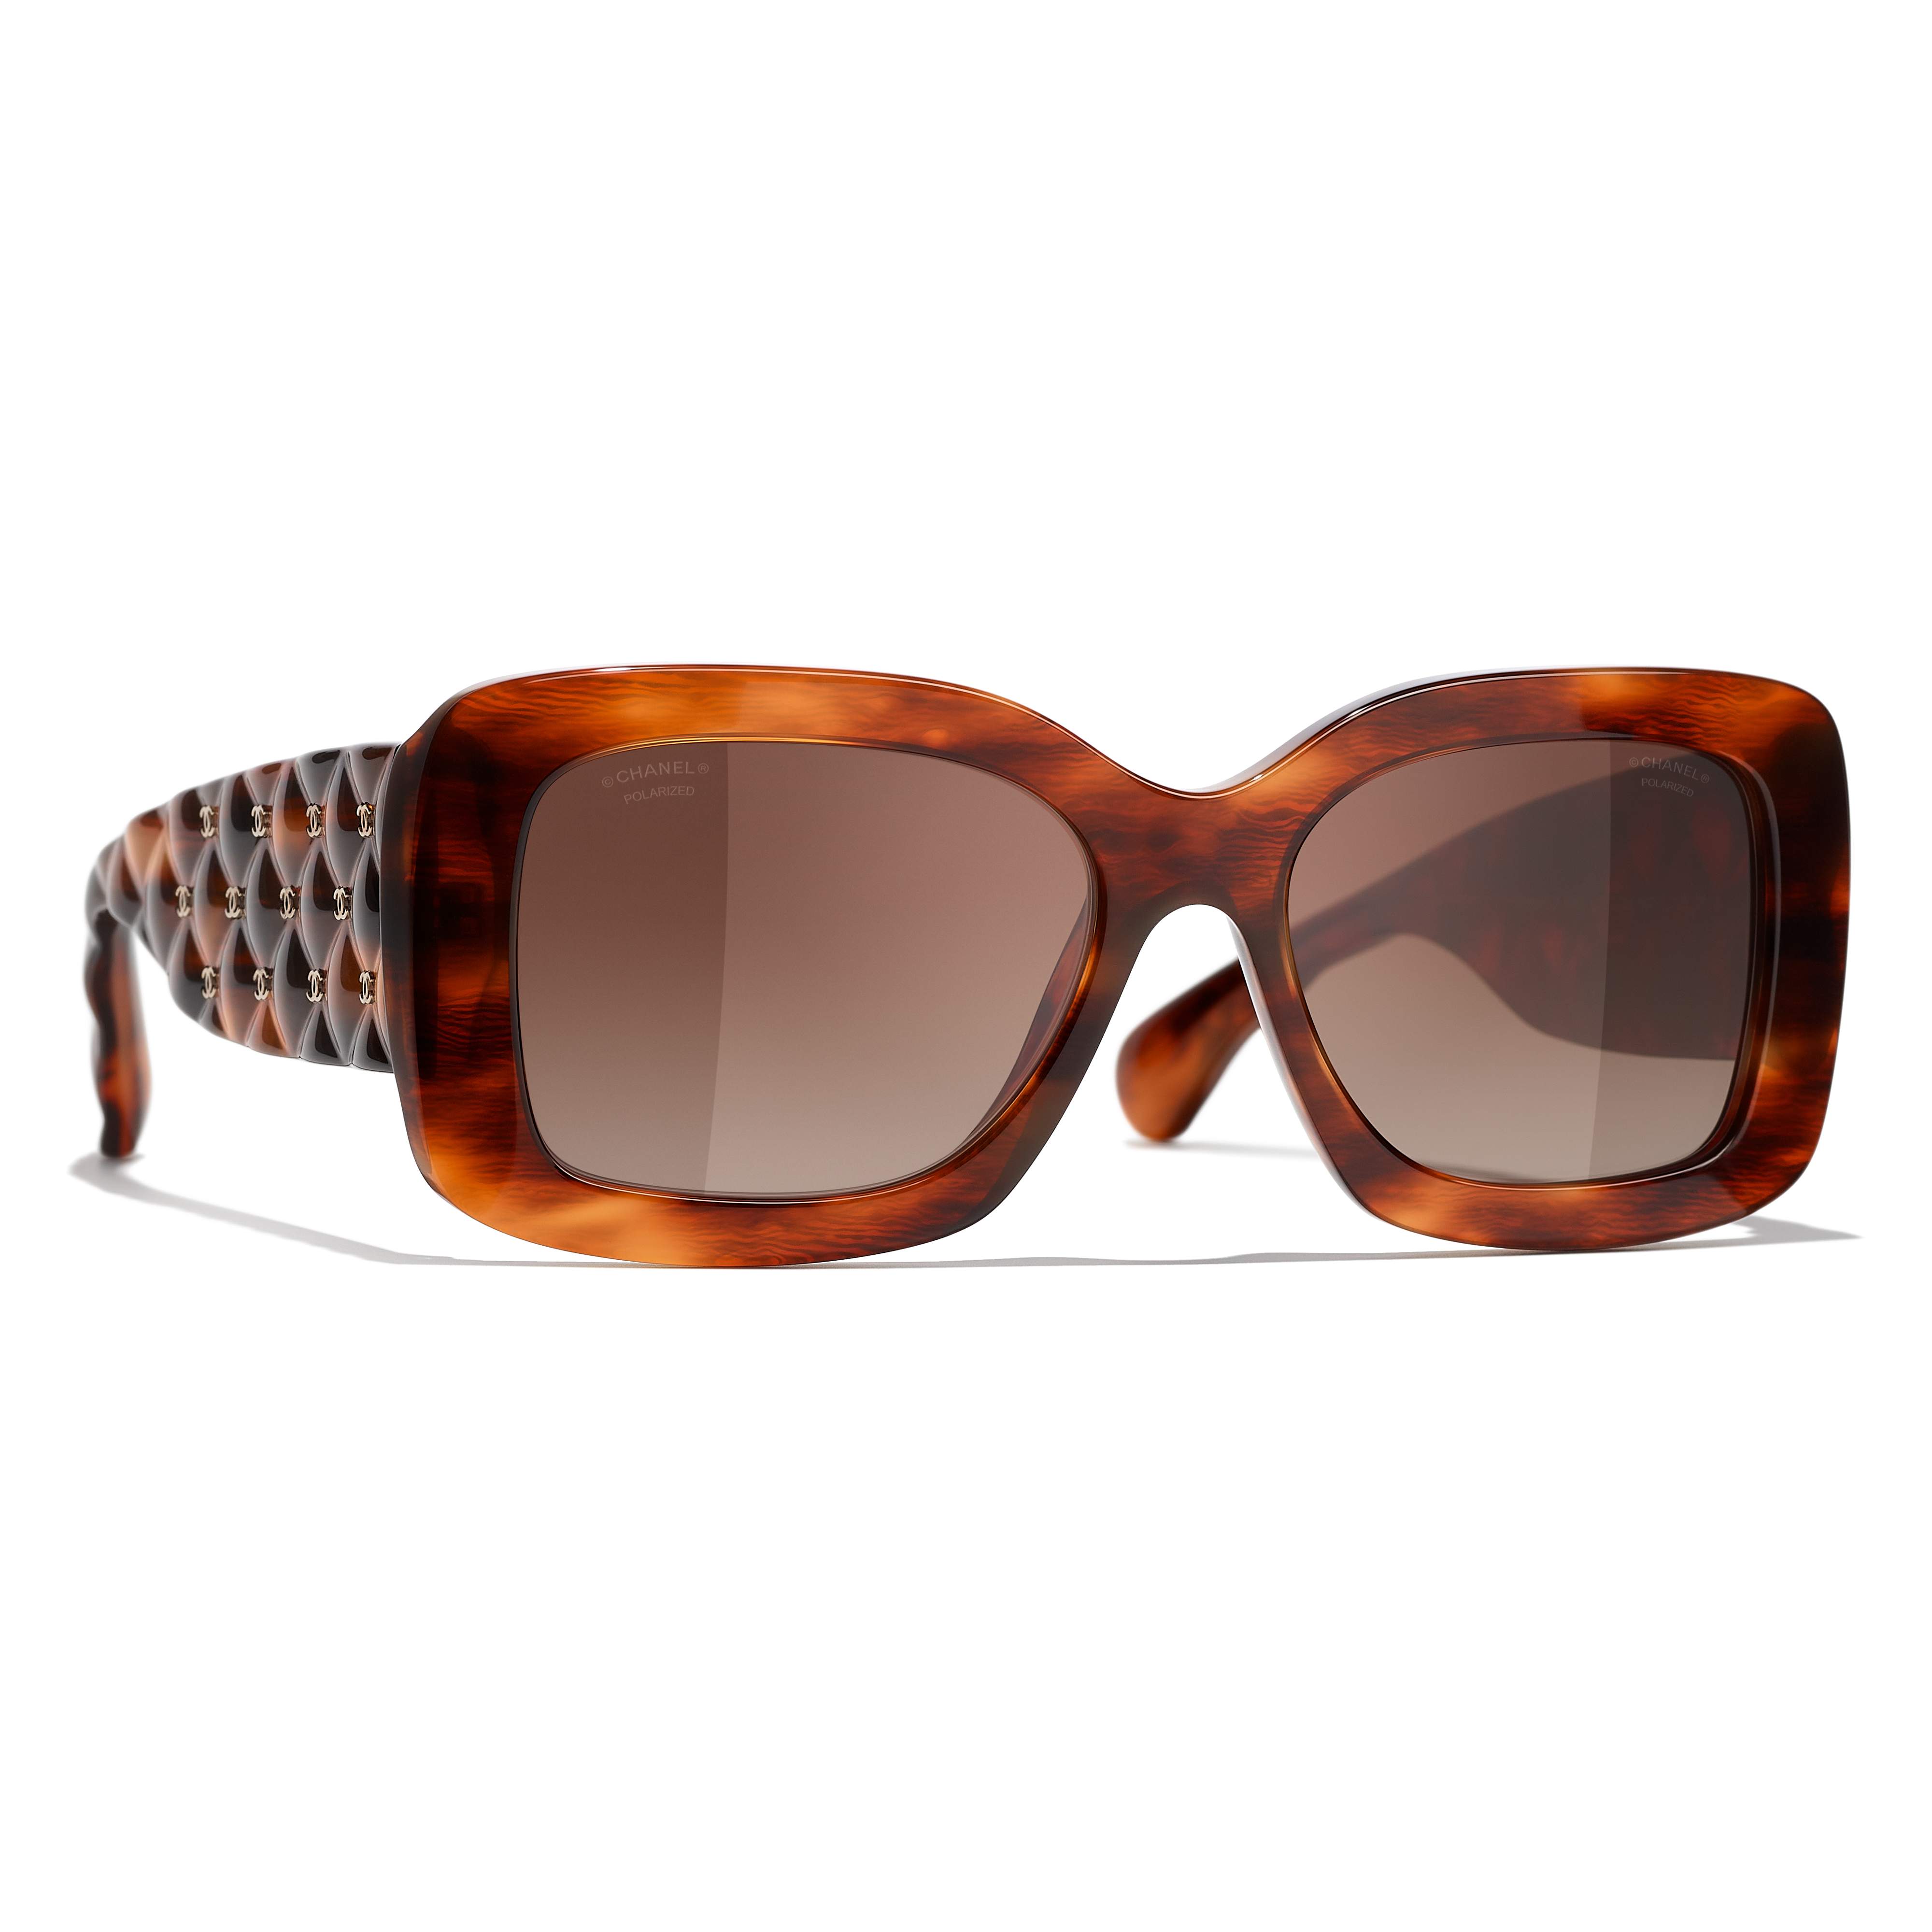 Sunglasses CHANEL CH5483 1077/S9 54-17 Striped Havana in stock Price € | Visiofactory